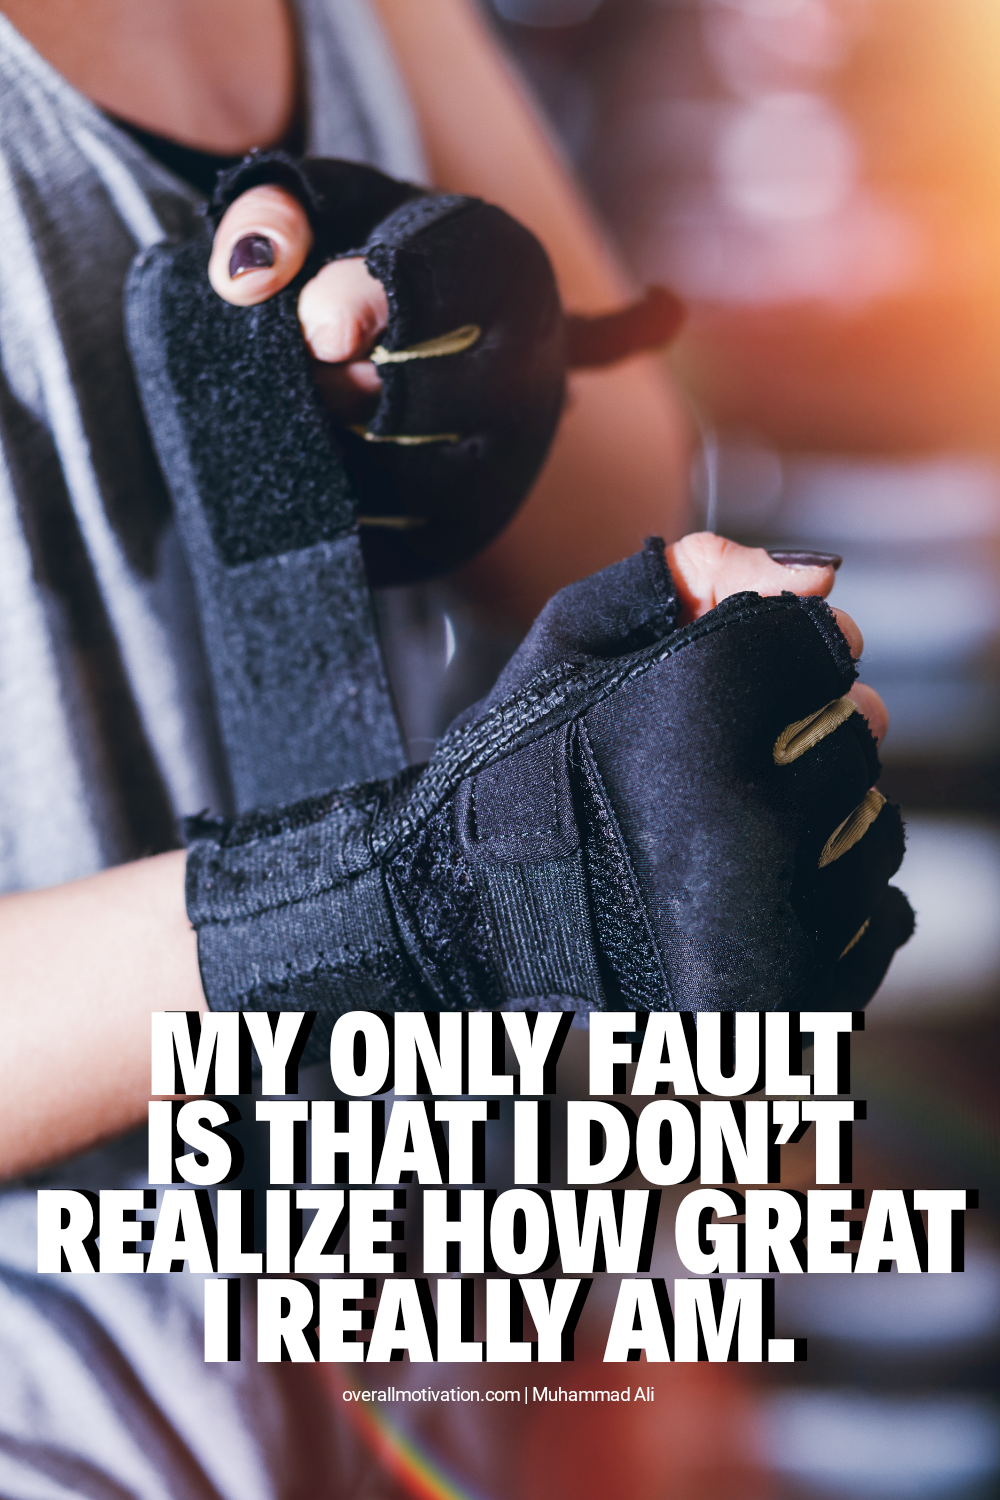 My only fault...